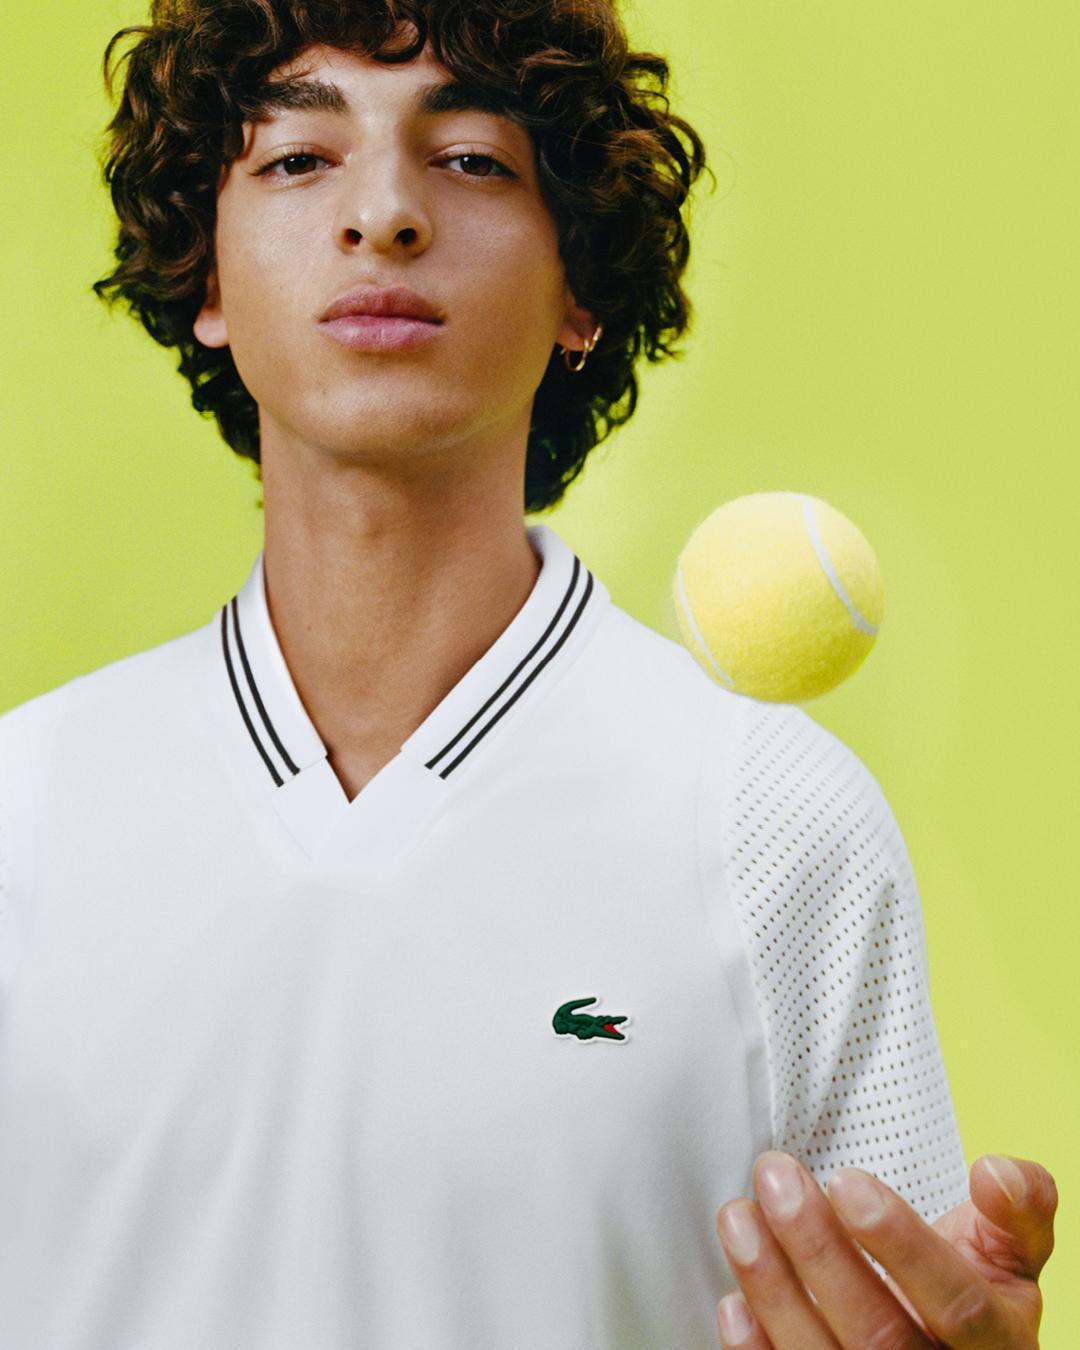 Lacoste launches Polo Franchise